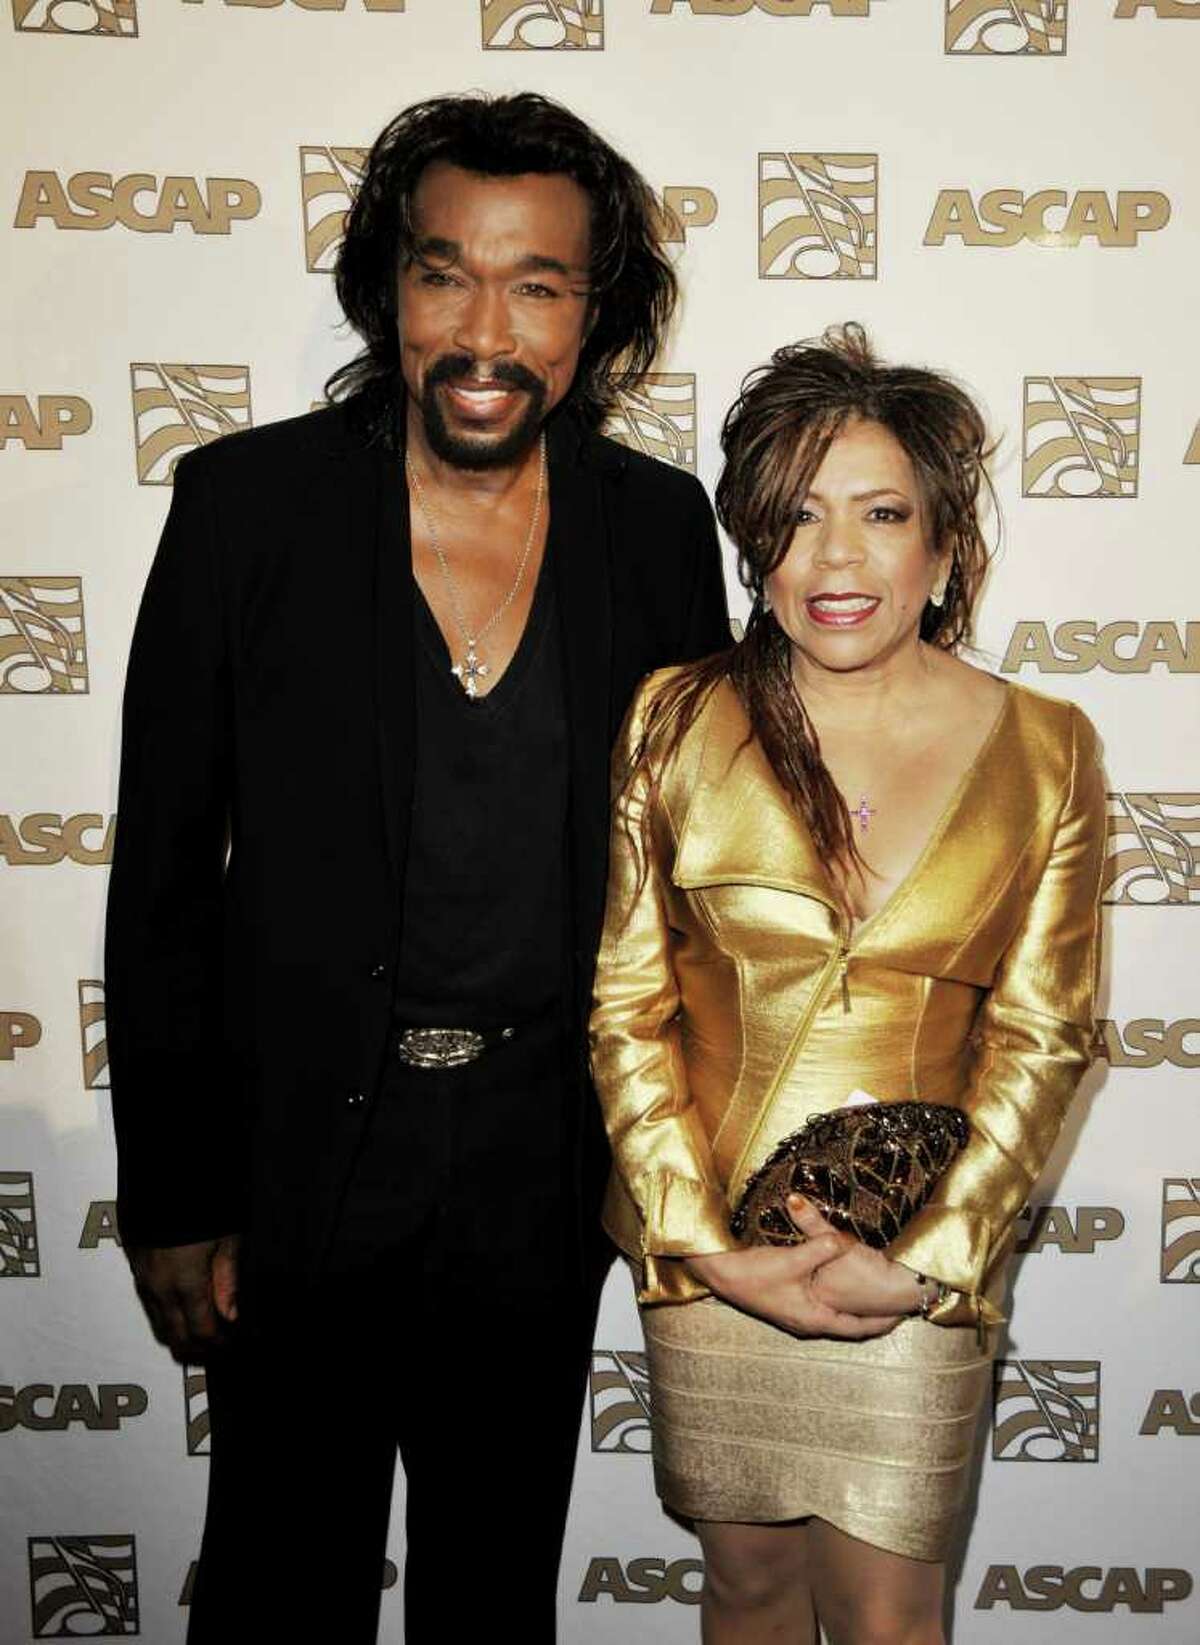 BEVERLY HILLS, CA - JUNE 26: Singers Nick Ashford (L) and Valerie Simpson arrive at the 22nd Annual ASCAP Rhythm & Soul Music Awards at the Beverly Hilton Hotel on June 26, 2009 in Beverly Hills, California. (Photo by Kevin Winter/Getty Images) *** Local Caption *** Nick Ashford;Valerie Simpson